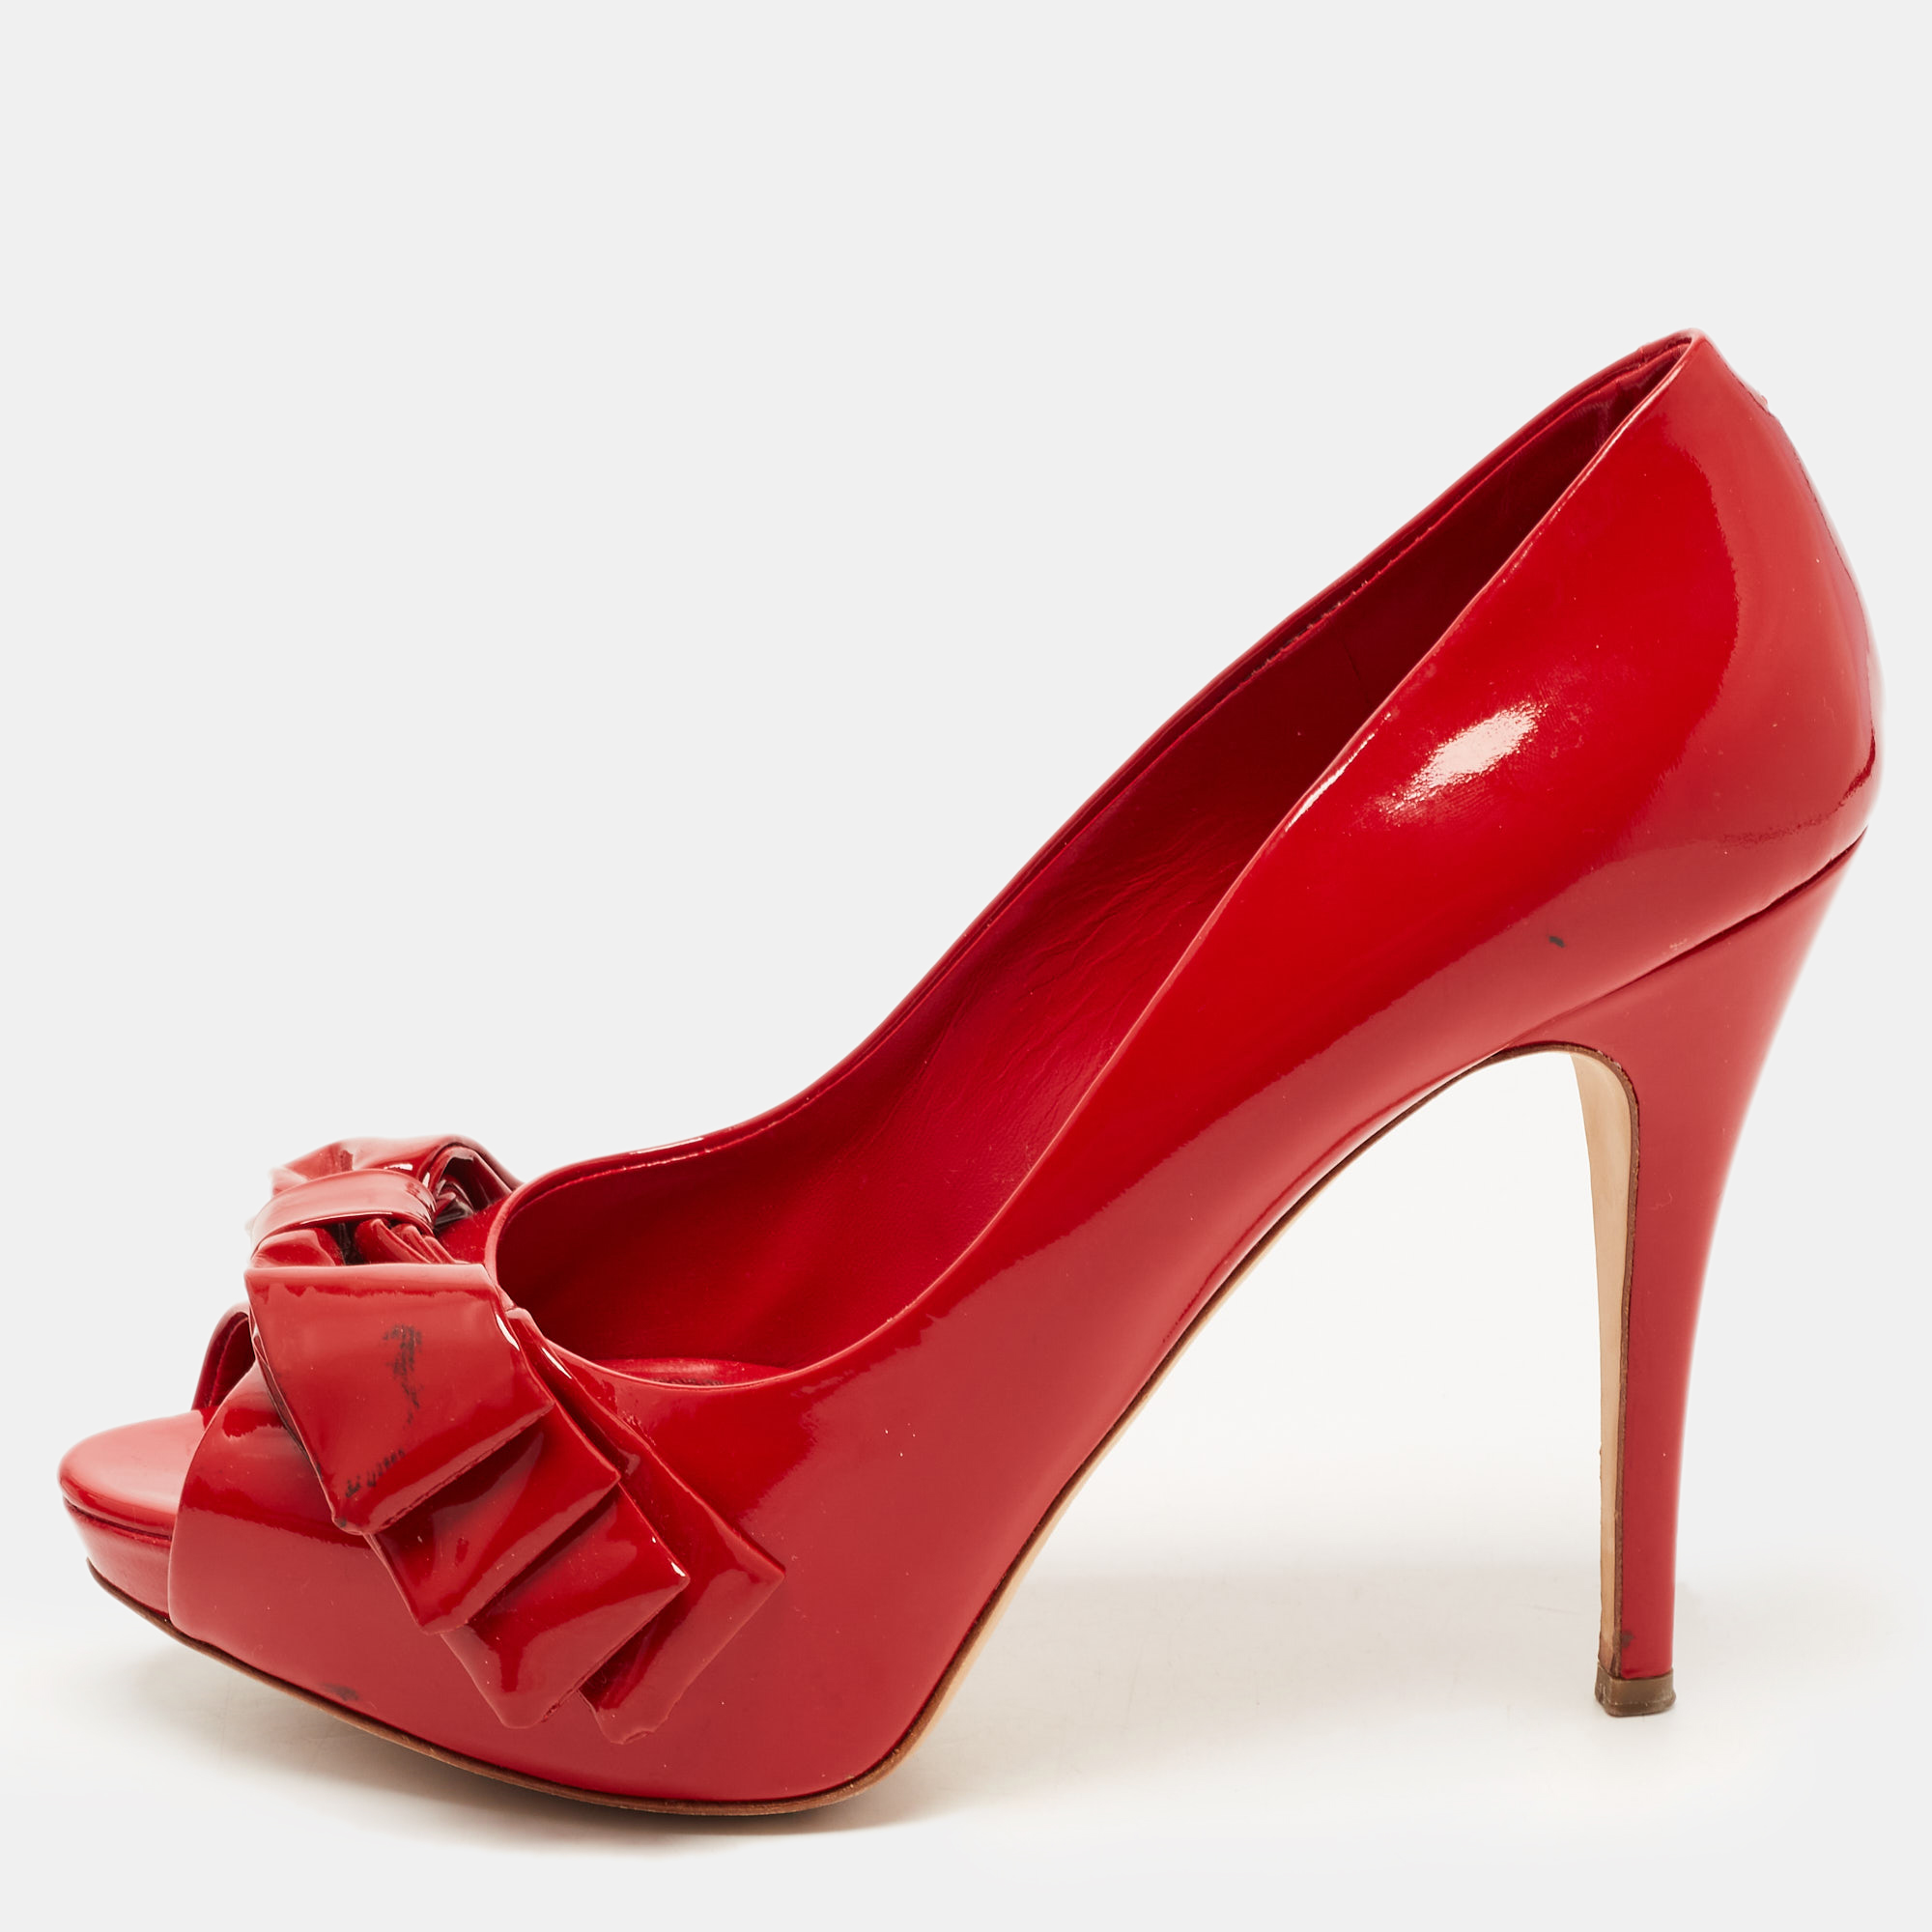 Dolce & Gabbana Red Patent Leather Bow Peep Toe Pumps Size 38.5